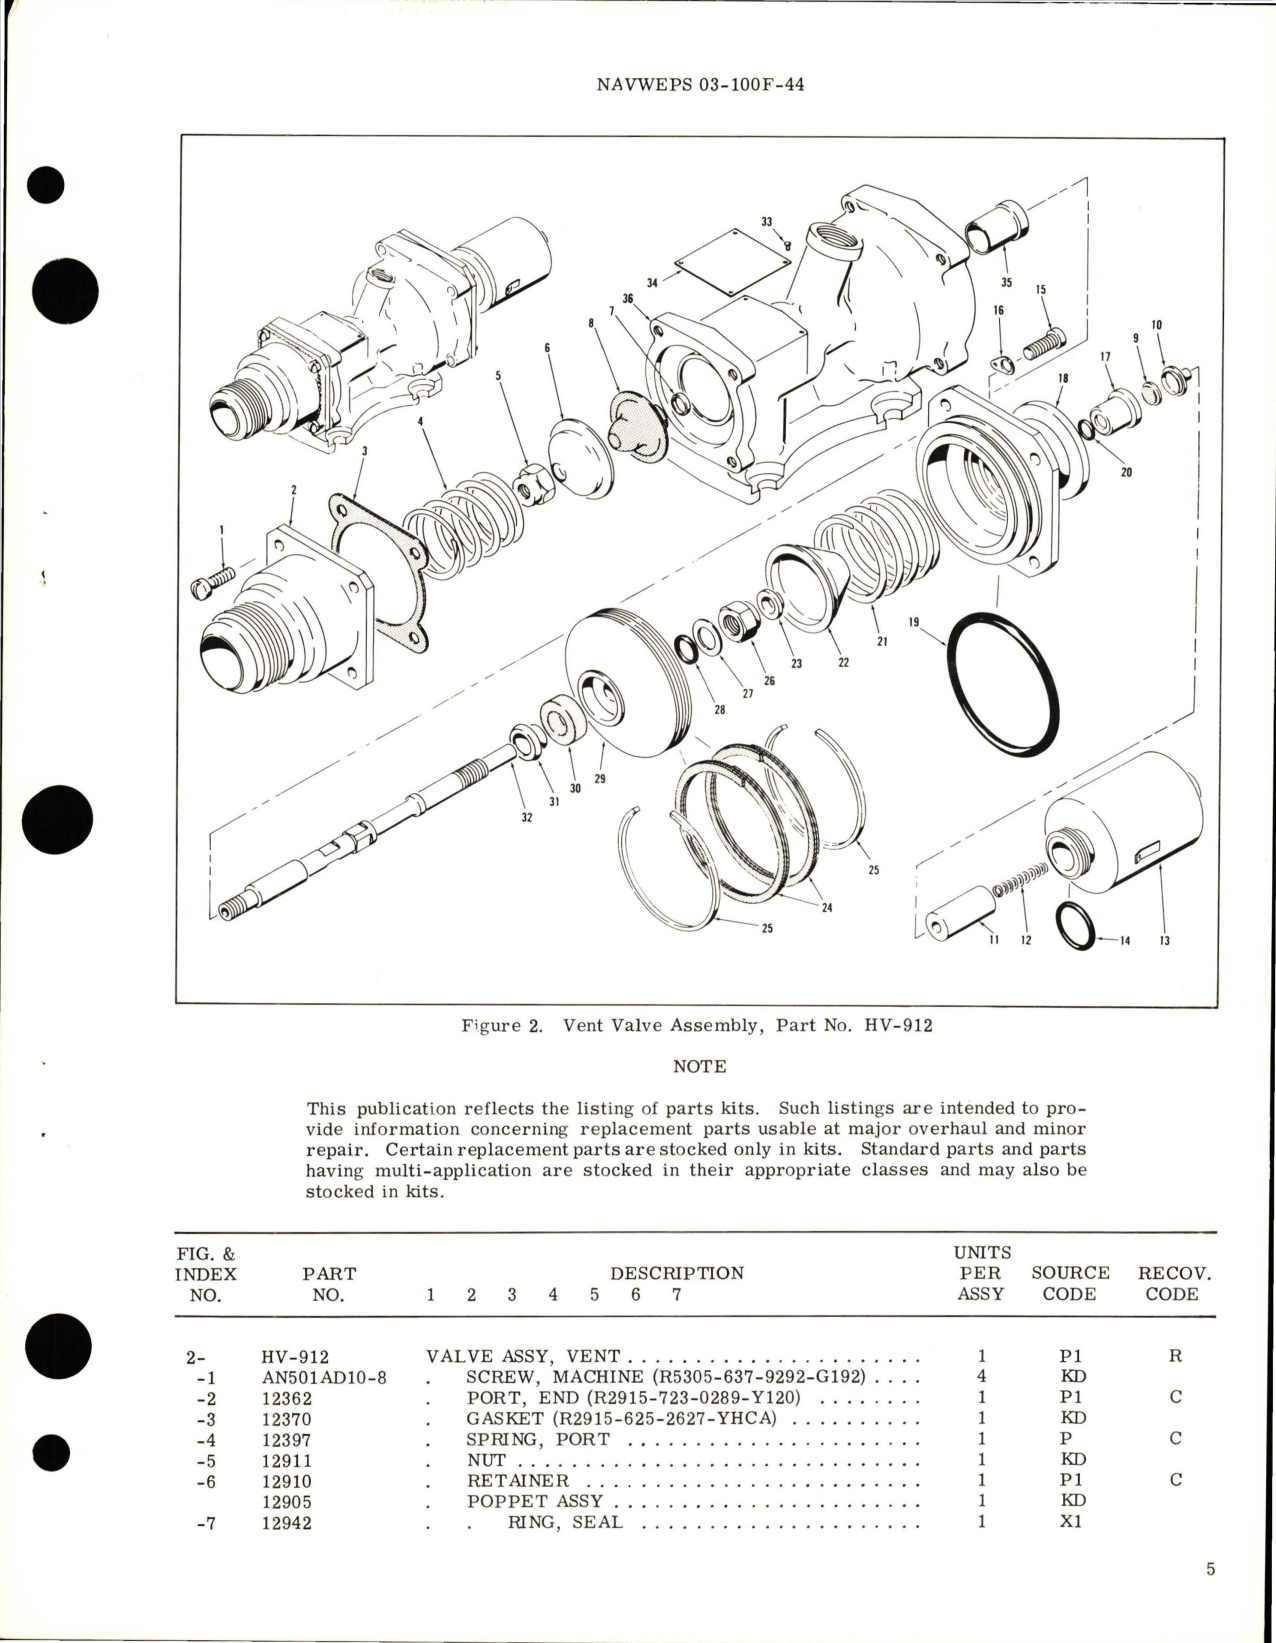 Sample page 5 from AirCorps Library document: Overhaul Instructions with Parts Breakdown for Vent Valve - Part HV-912